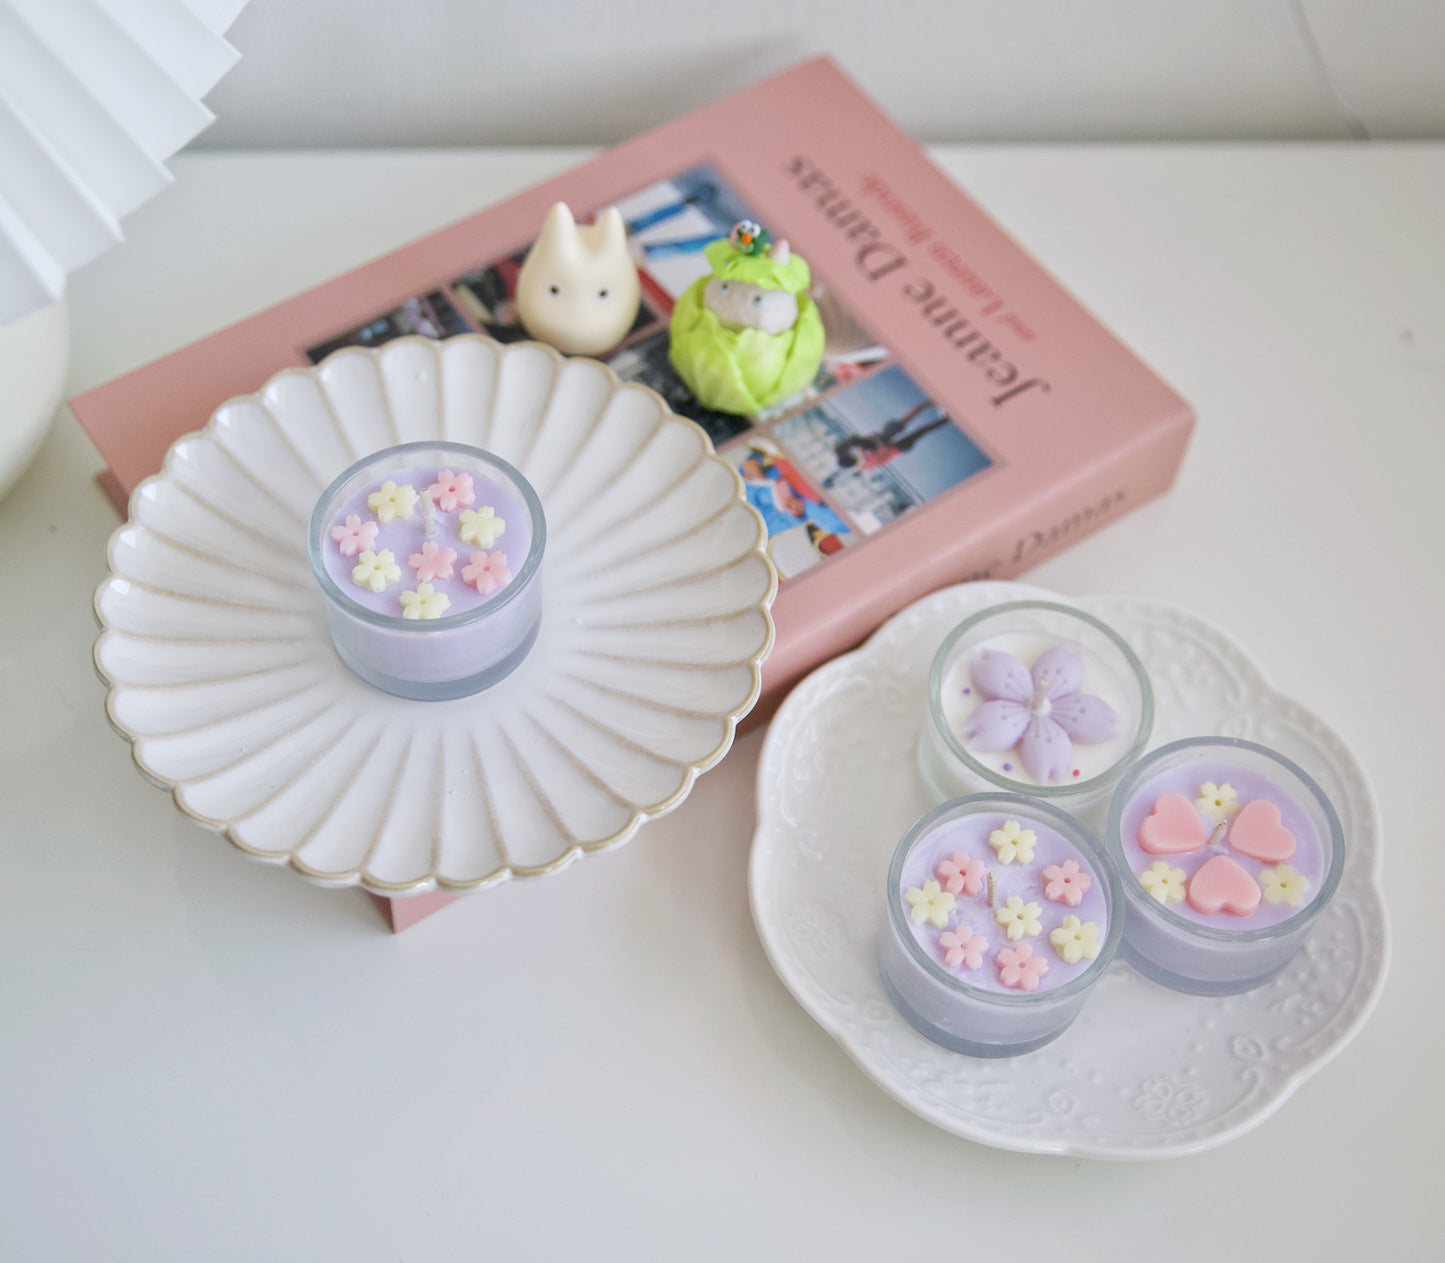 Handmade Tealight Pastel Flower Candle - Unscented Decorative Candle - Vegan Soywax